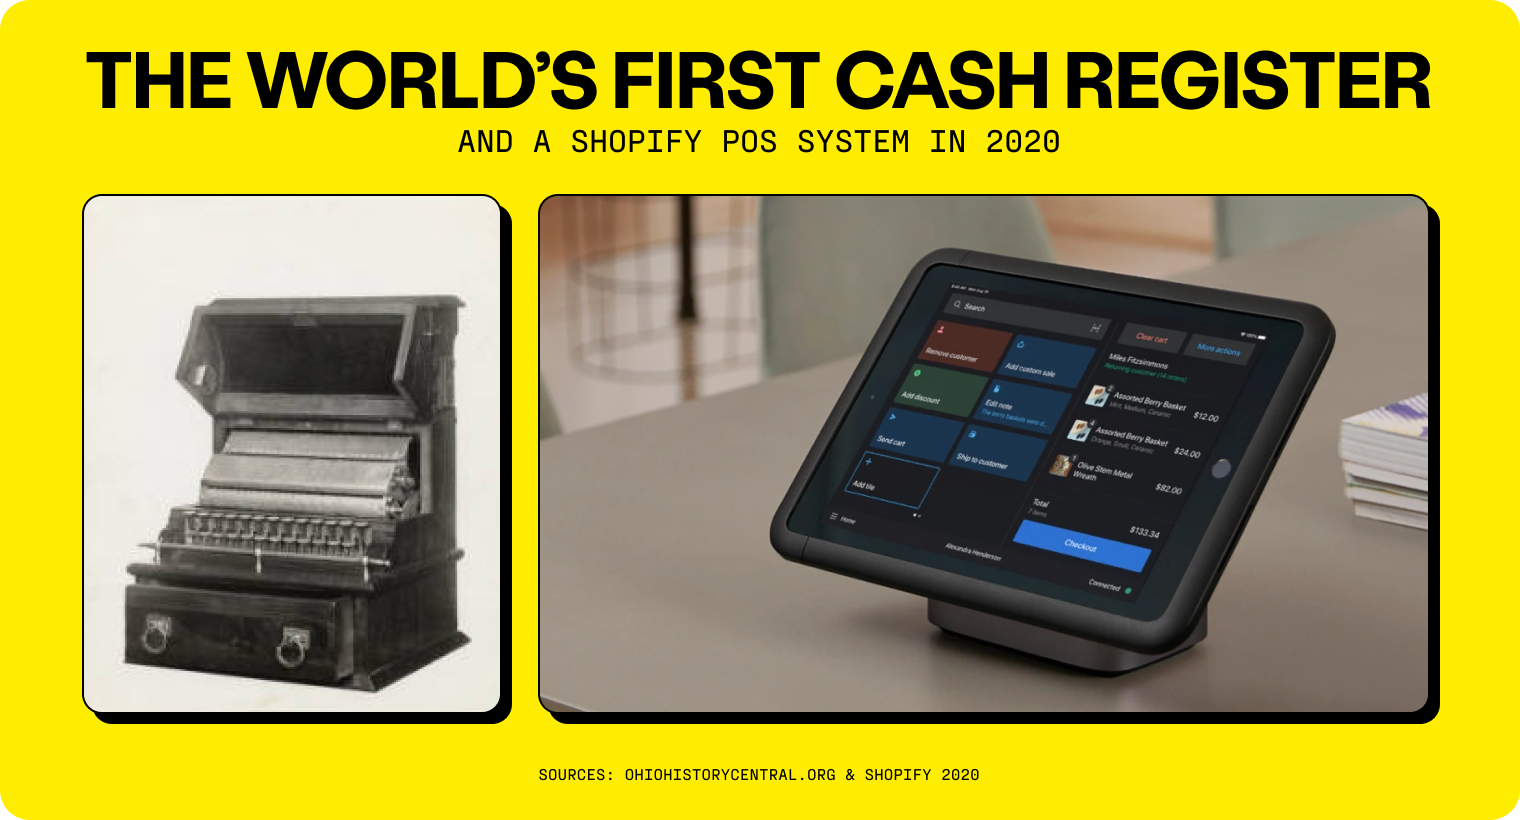 The world’s first cash register, invented by James Retty in 1897. 